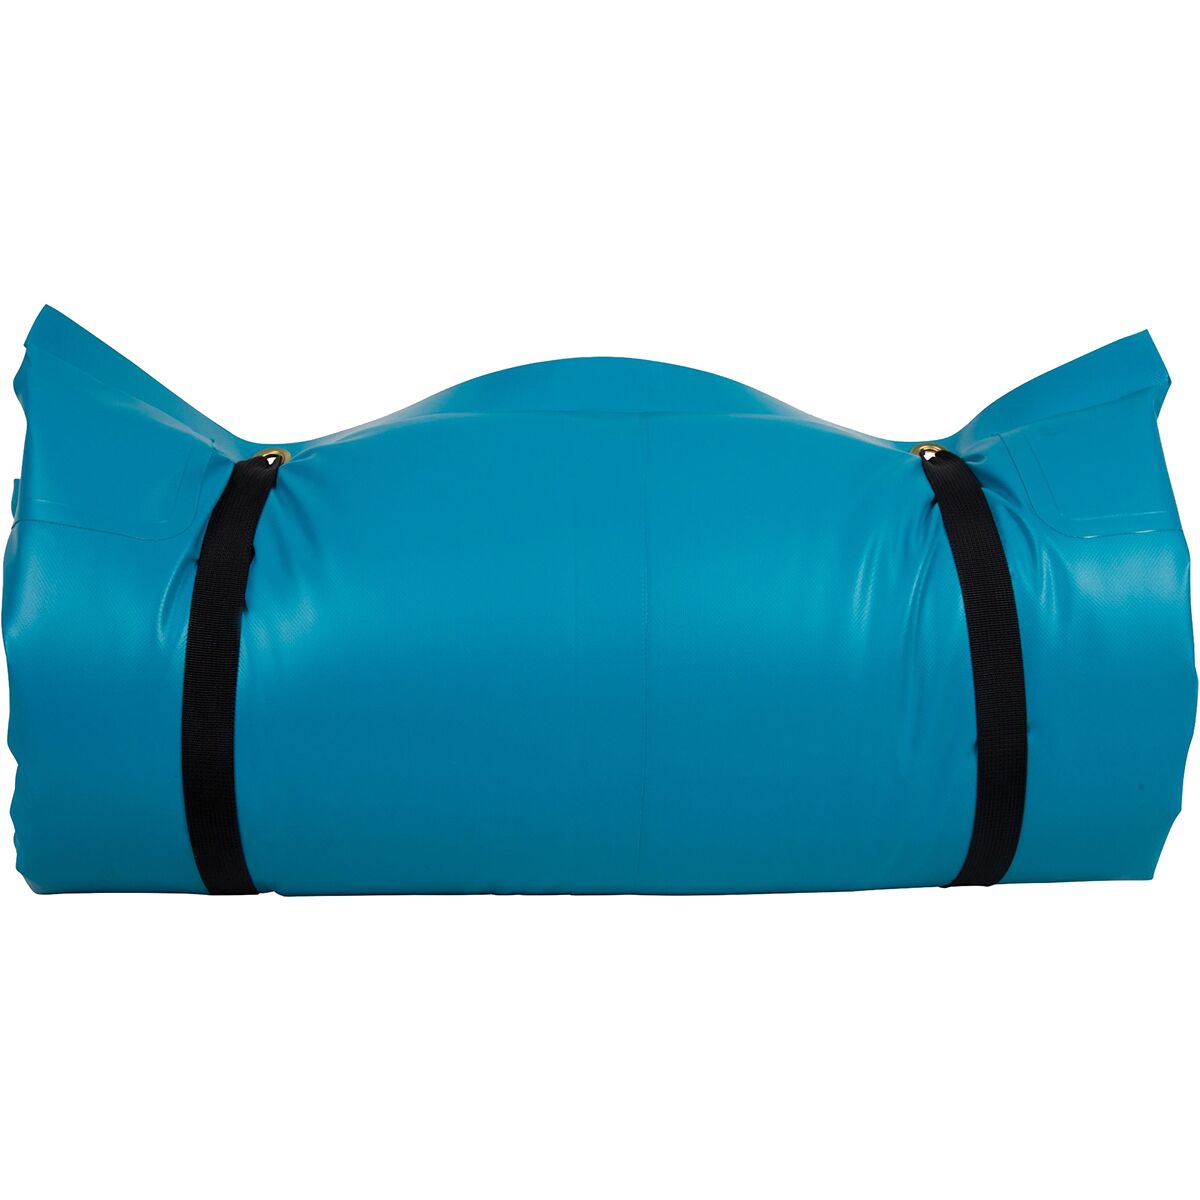 NRS River Bed Sleeping Pads